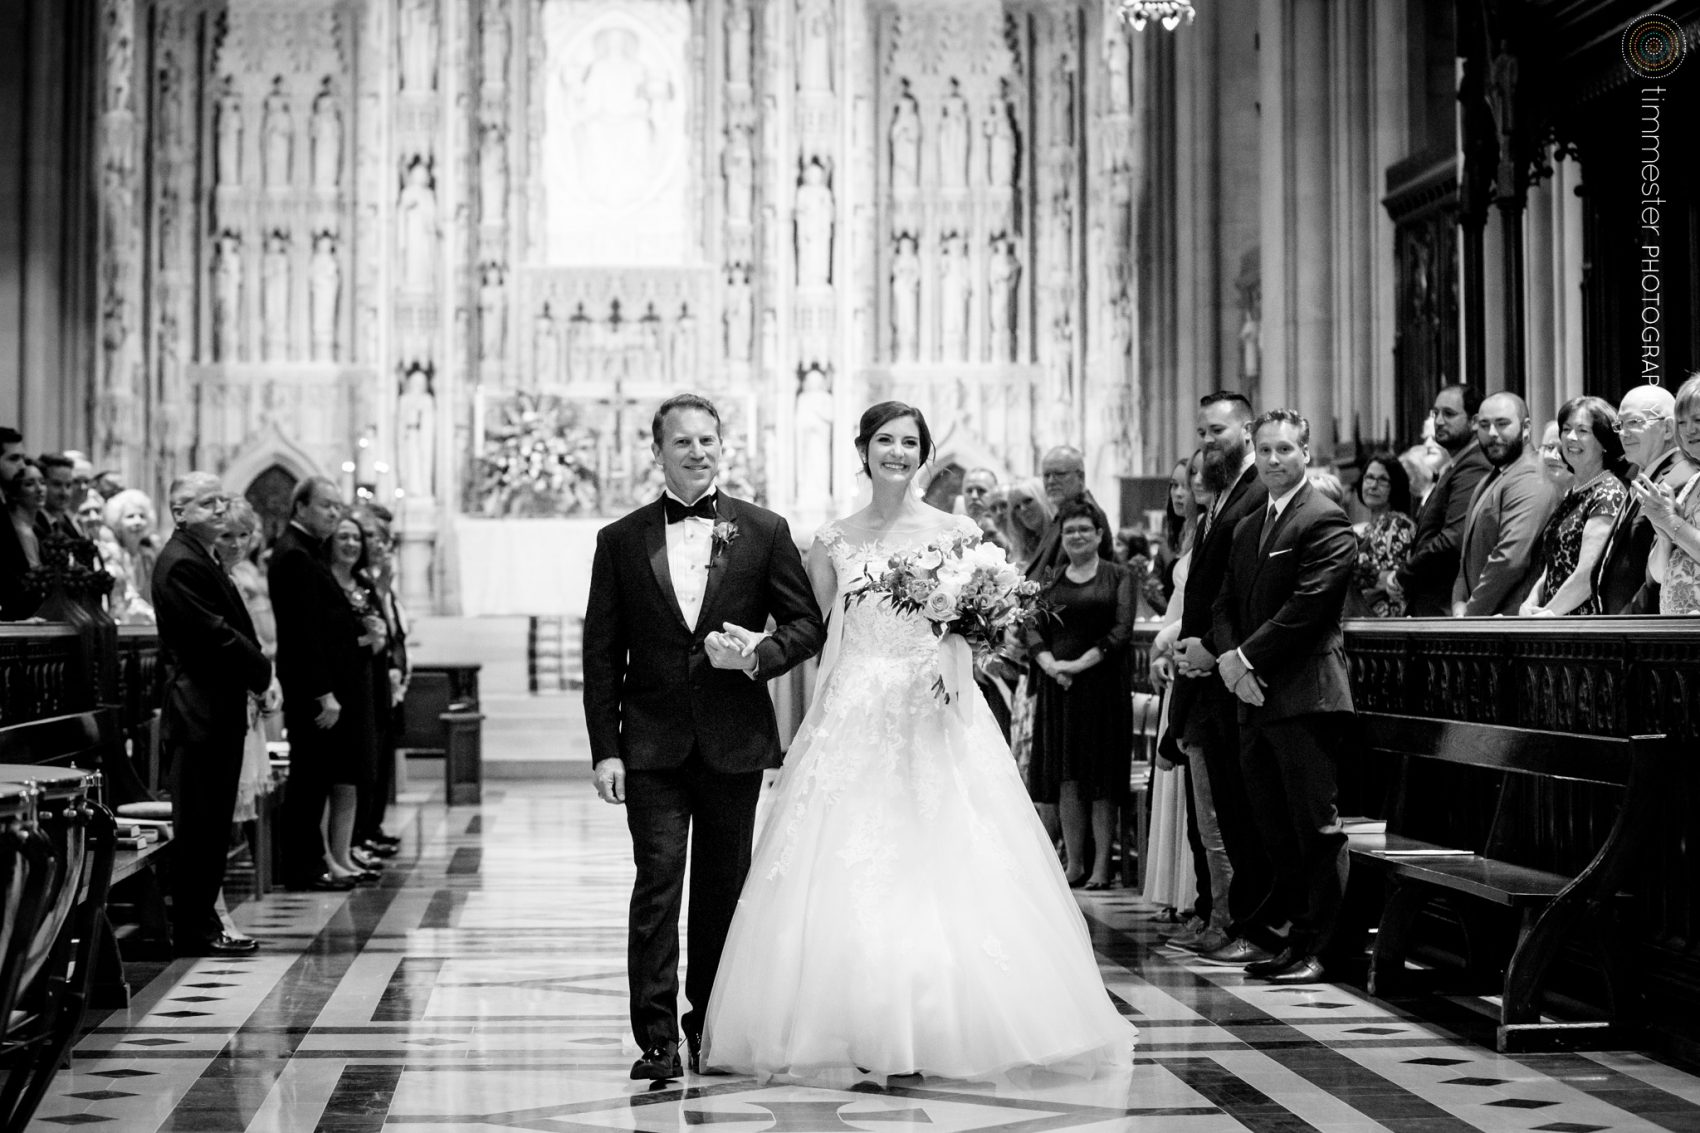 Just married after their wedding ceremony at Washington National Cathedral in DC!